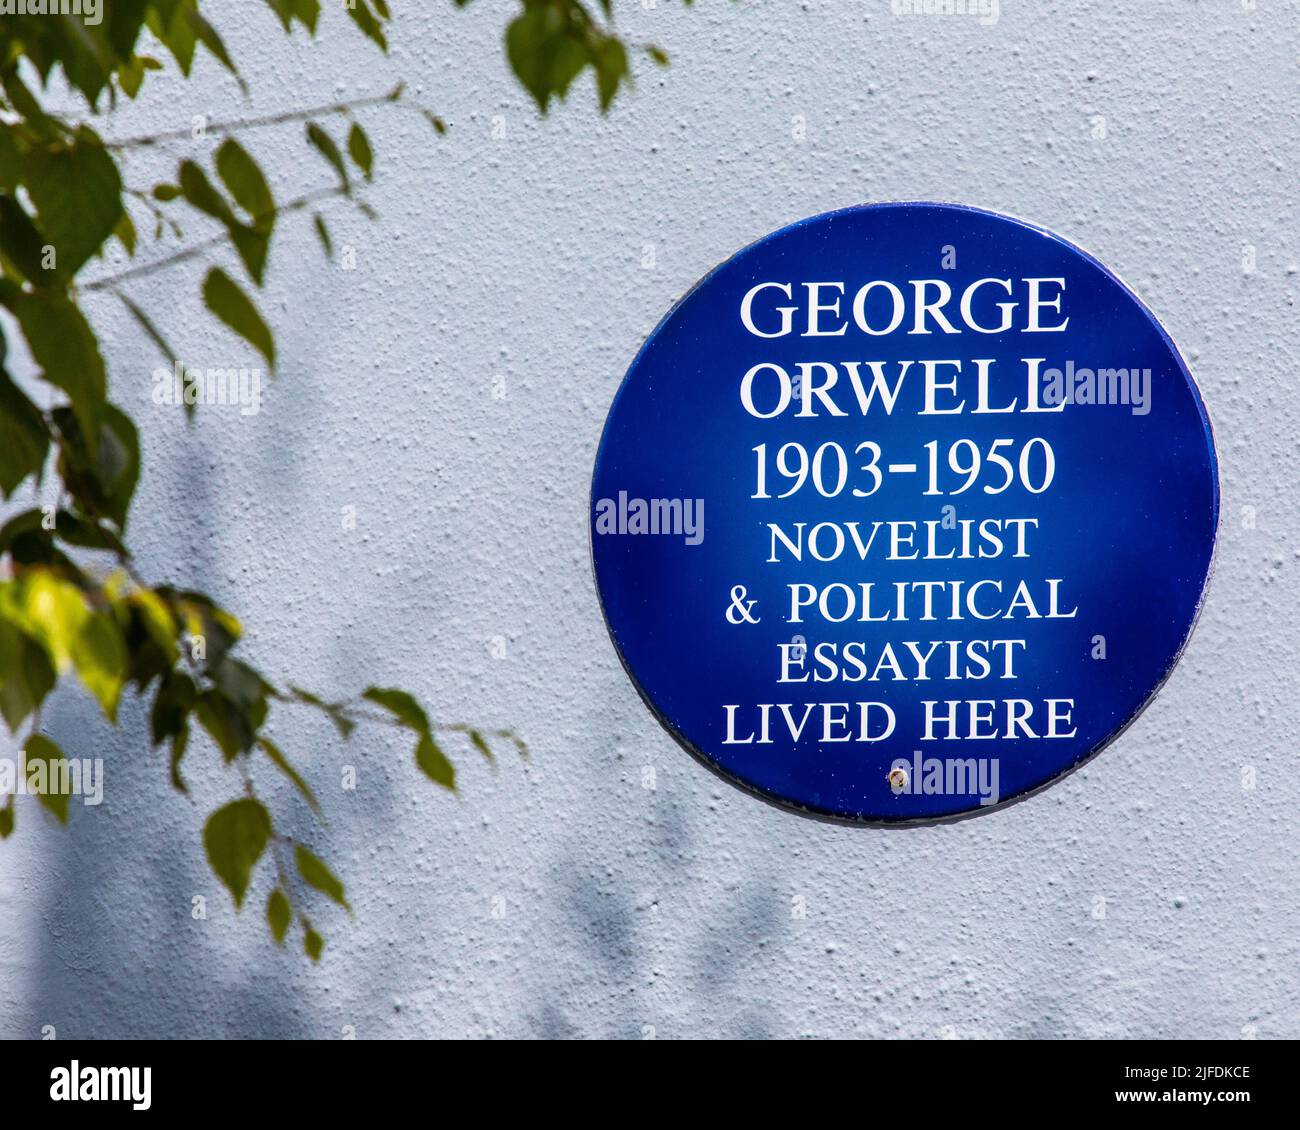 London, UK - May 5th 2022: A plaque located on Portobello Road in London, UK, marking the location where famous novelist George Orwell once lived. Stock Photo